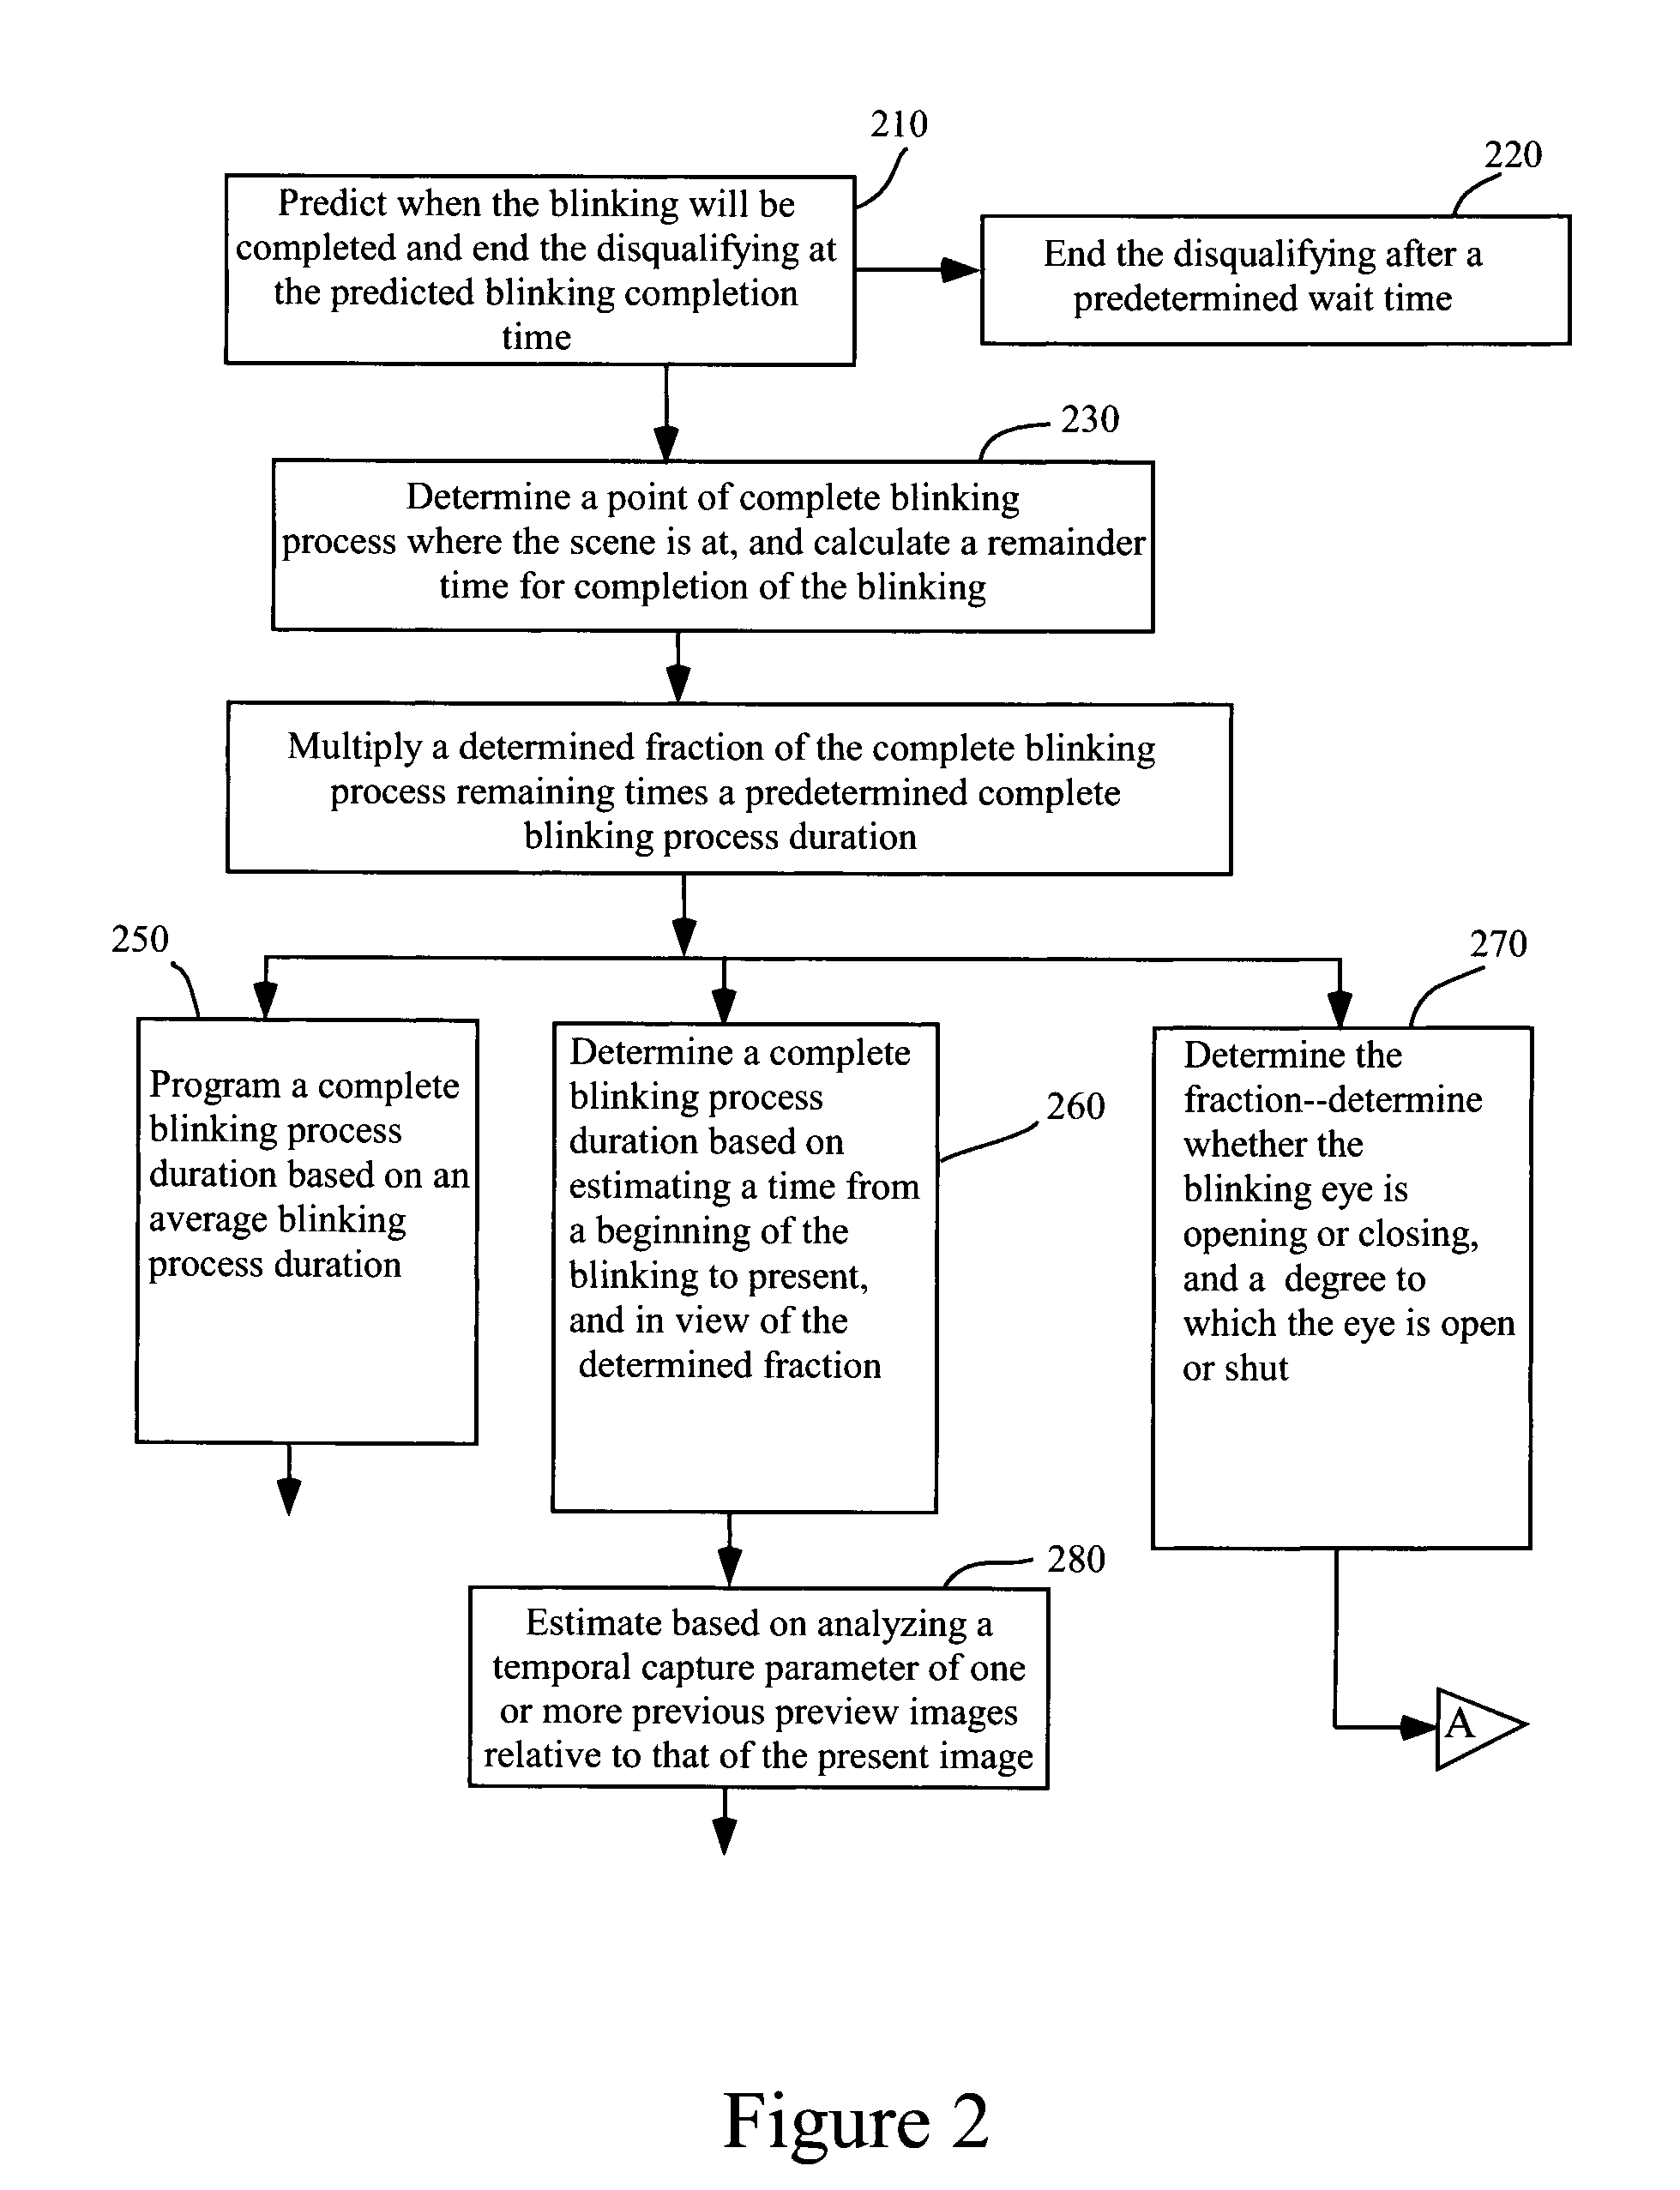 Method and Apparatus for Selective Disqualification of Digital Images